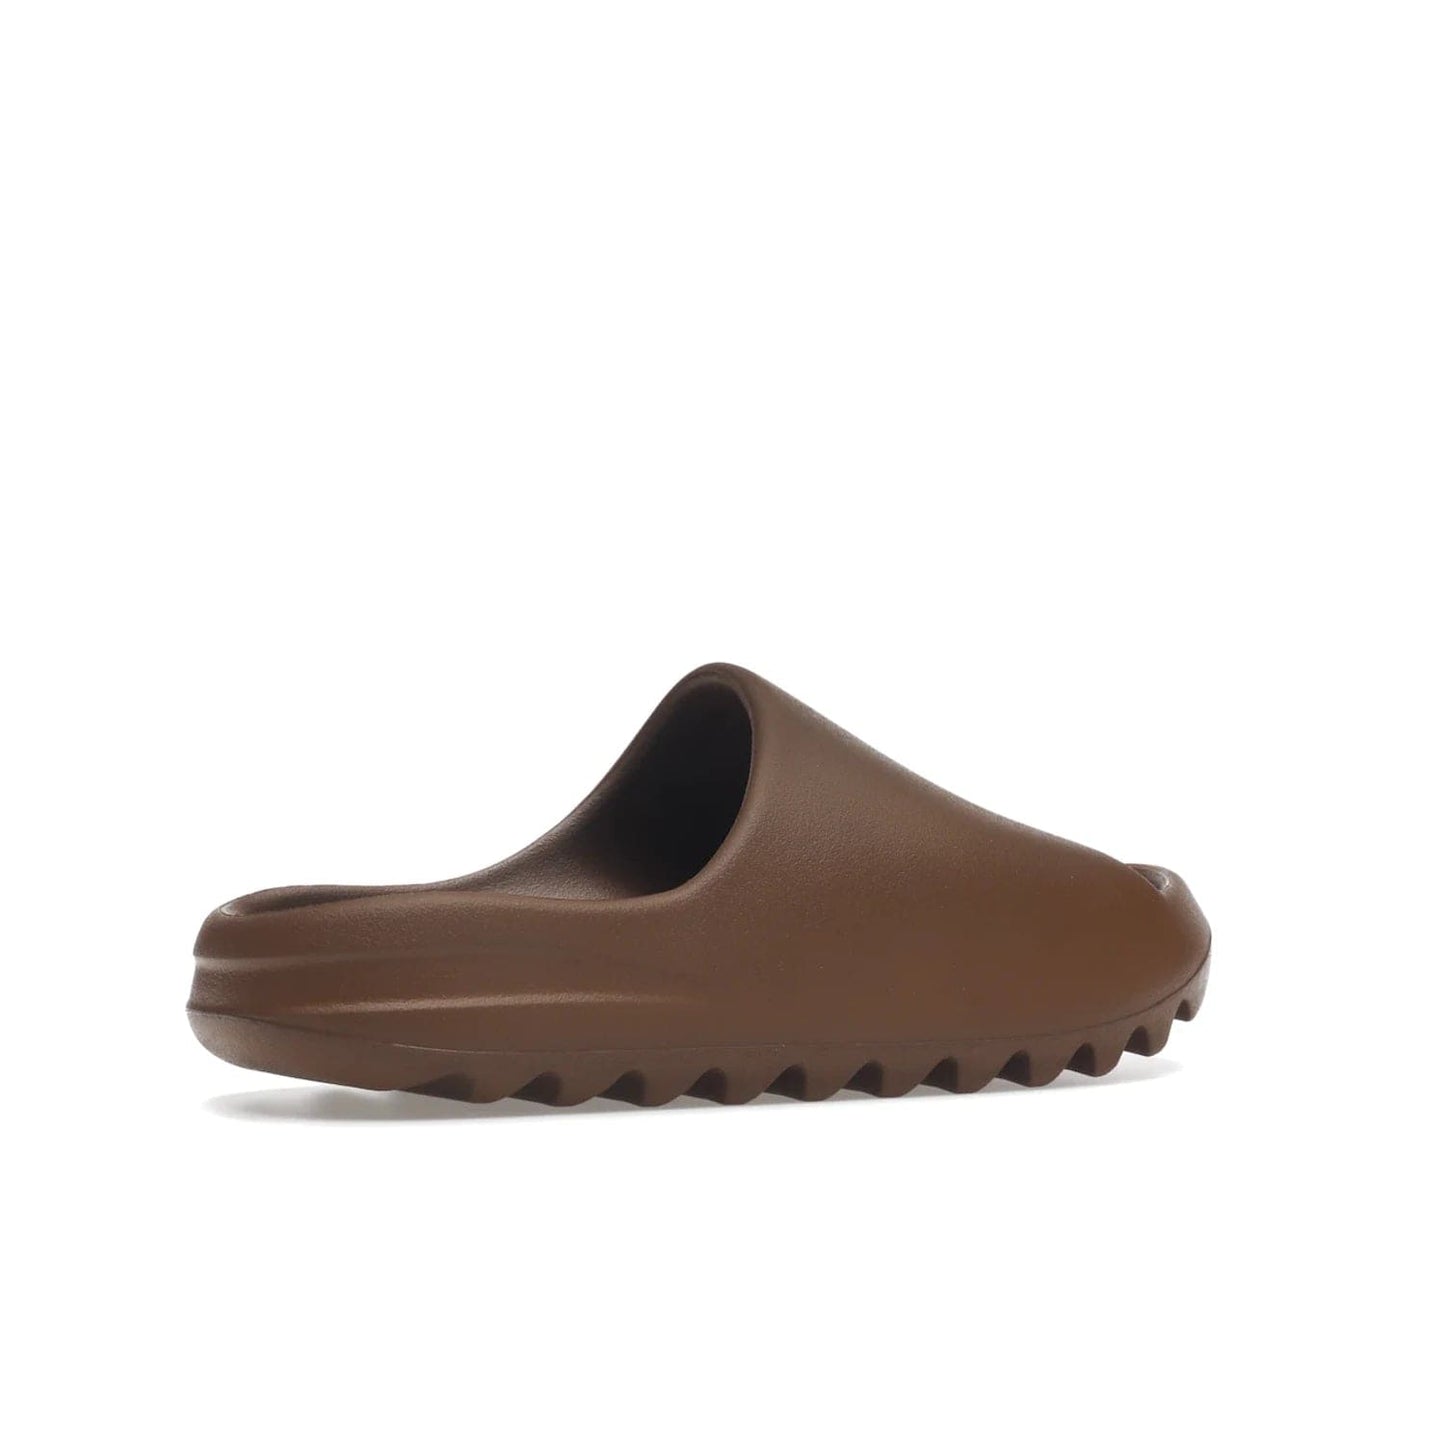 adidas Yeezy Slide Flax - Image 34 - Only at www.BallersClubKickz.com - Score the perfect casual look with the adidas Yeezy Slide Flax. Made with lightweight injected EVA plus horizontal grooves underfoot for traction. Release on August 22, 2022. $70.